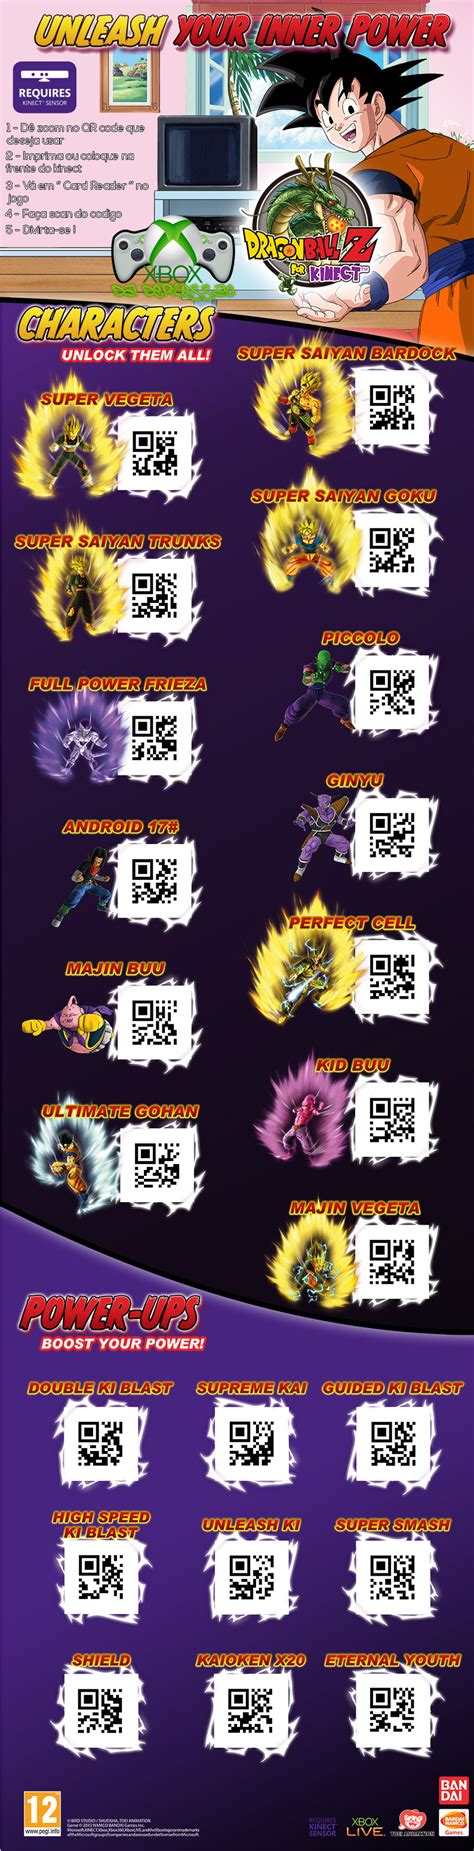 Dragon ball legends consist of fighters having a distinct set of abilities and equipment. QR Codes - Dragon Ball Z for Kinect by KaaueR on DeviantArt